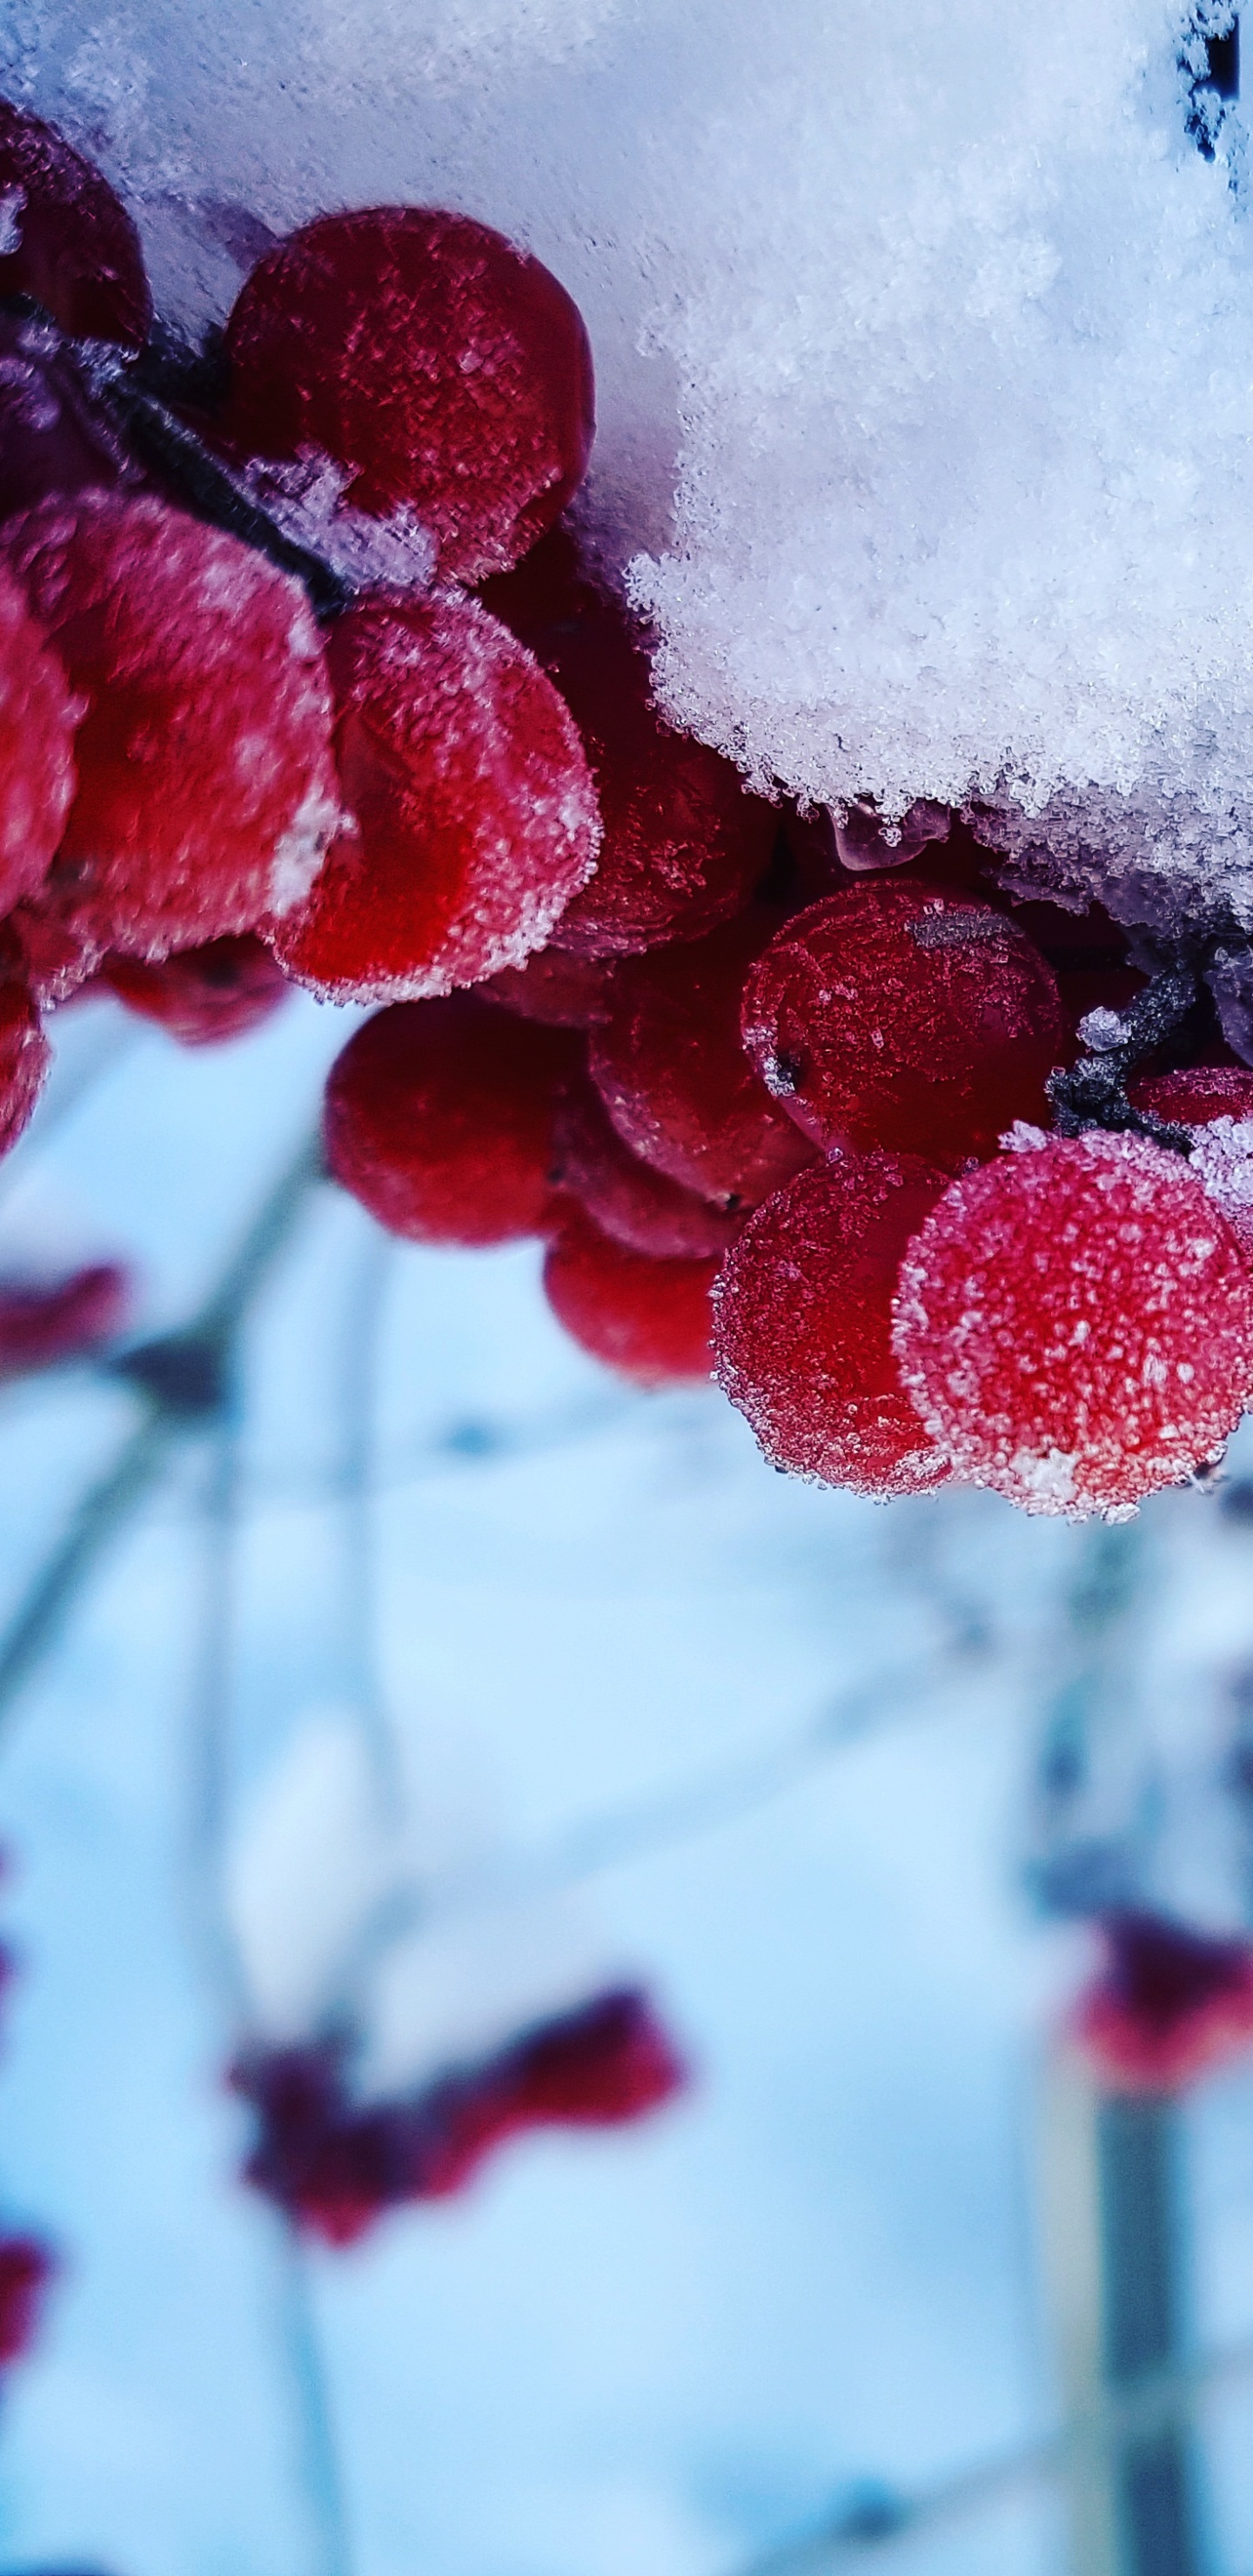 Fruits Ronds Rouges Recouverts de Neige. Wallpaper in 1440x2960 Resolution